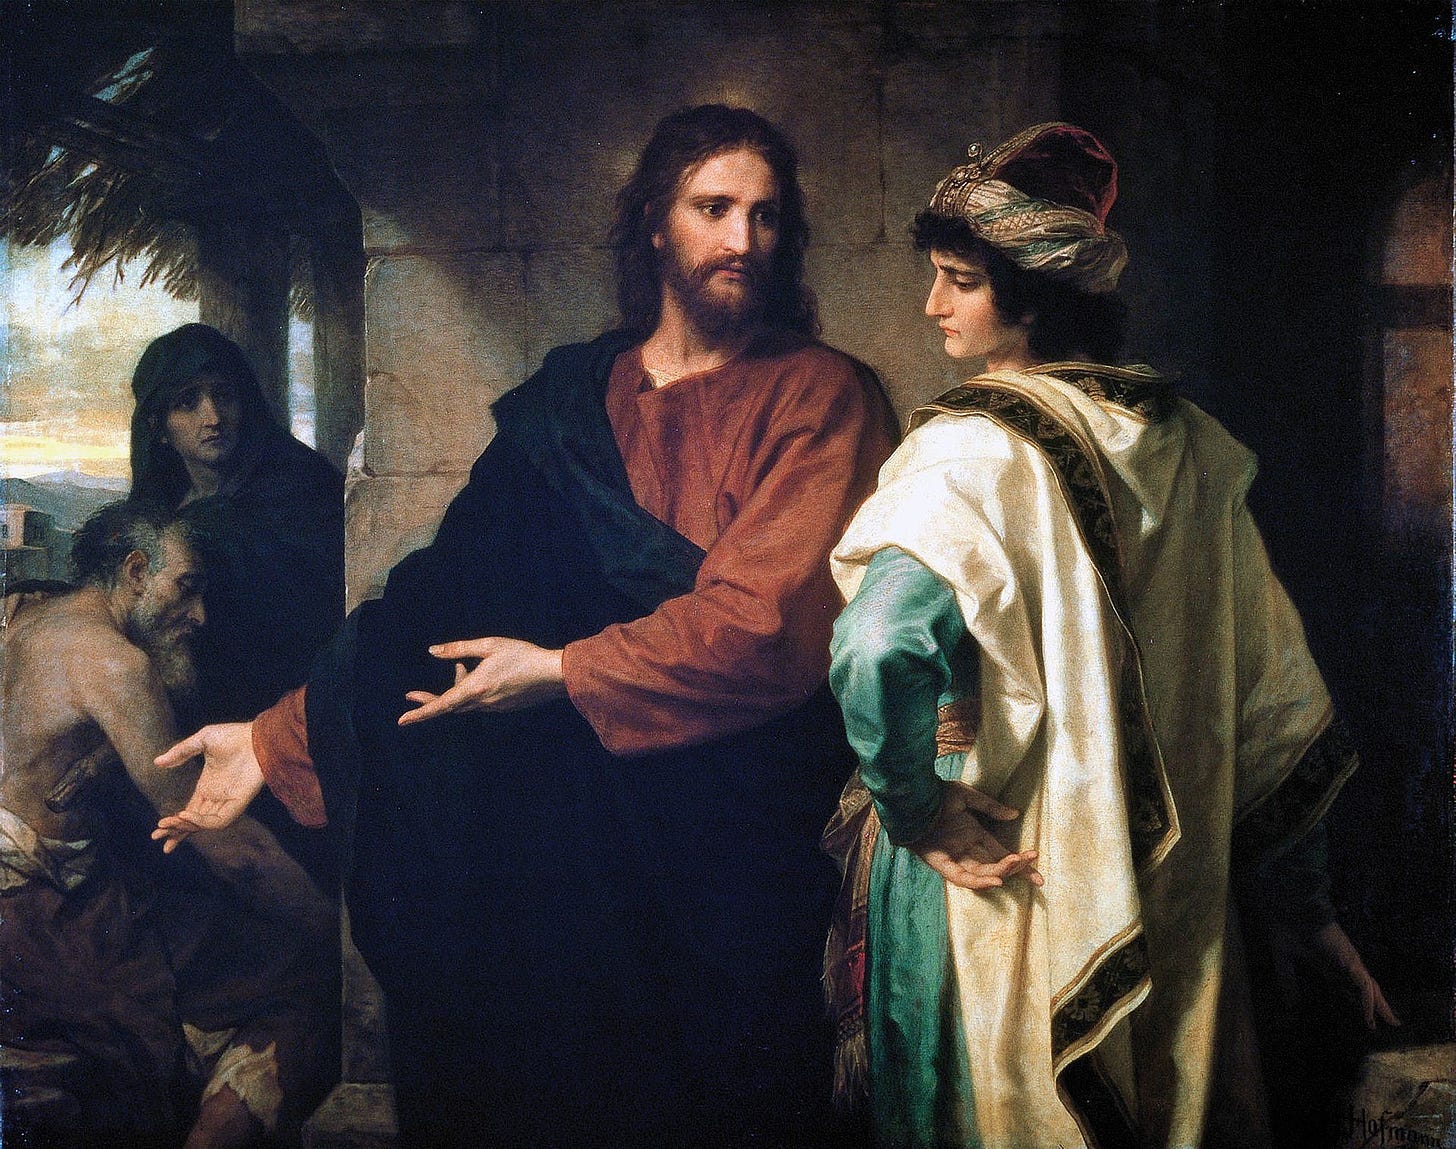 1889 painting of Christ instructing the rich young man from the gospel